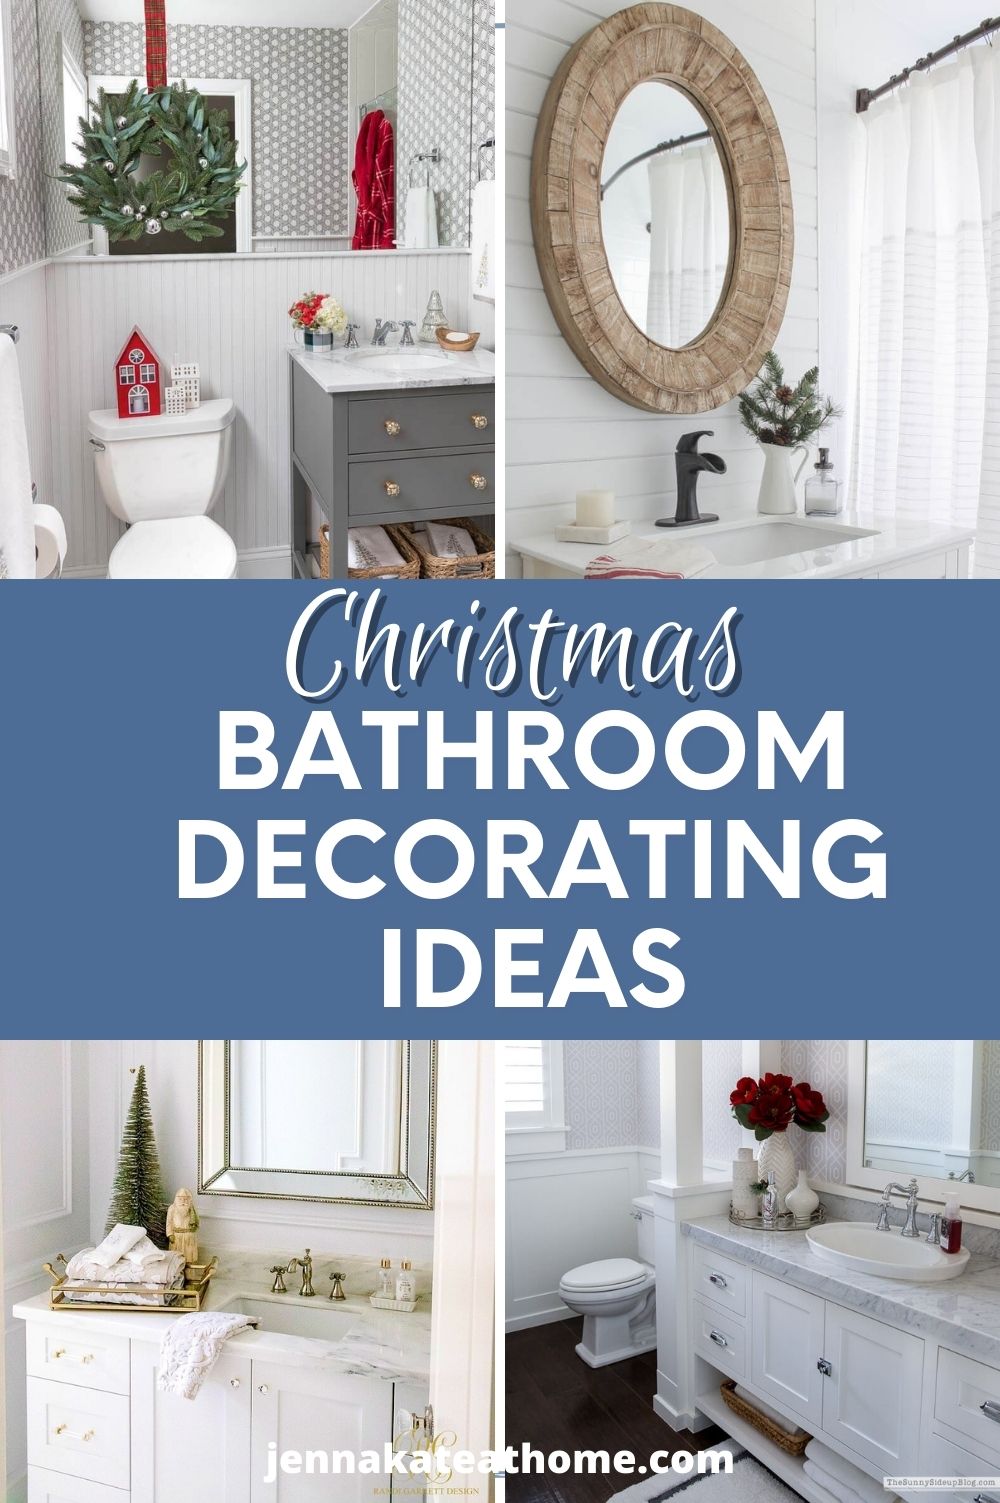 Decorating Ideas For Your Bathroom This Christmas Jenna Kate At Home